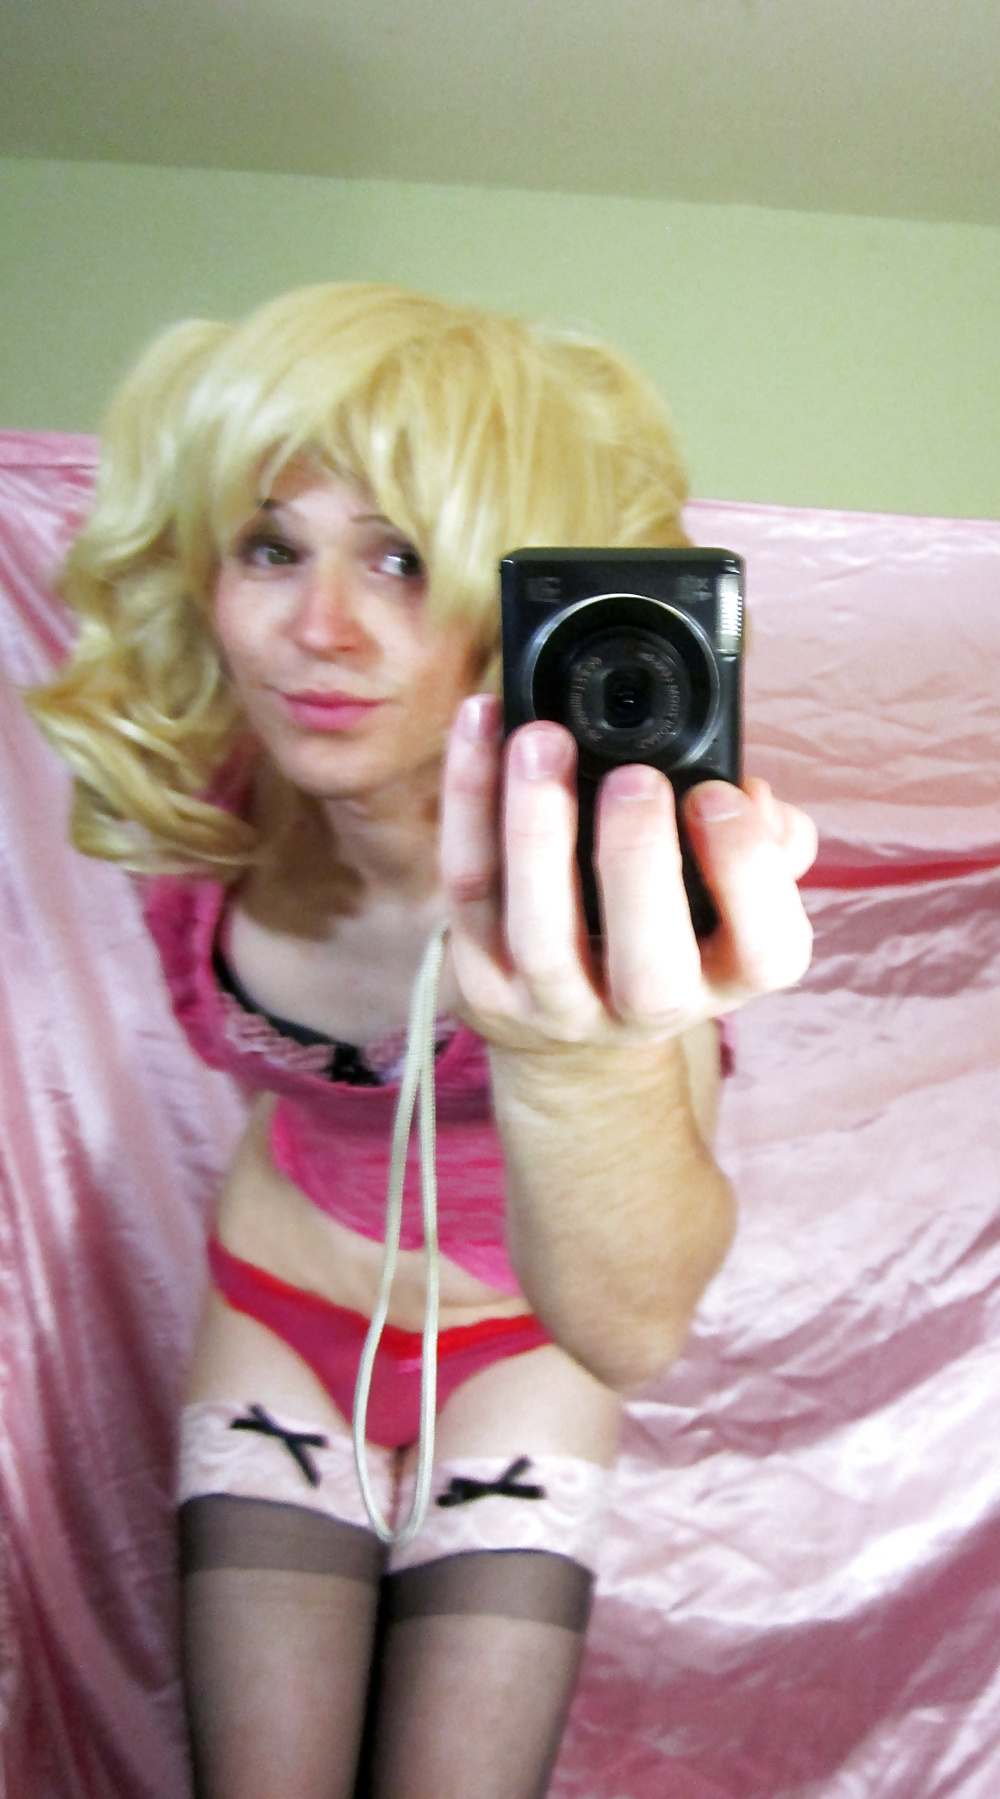 New sissy pics ! blonde pigtails and cocksucking (: #29783868